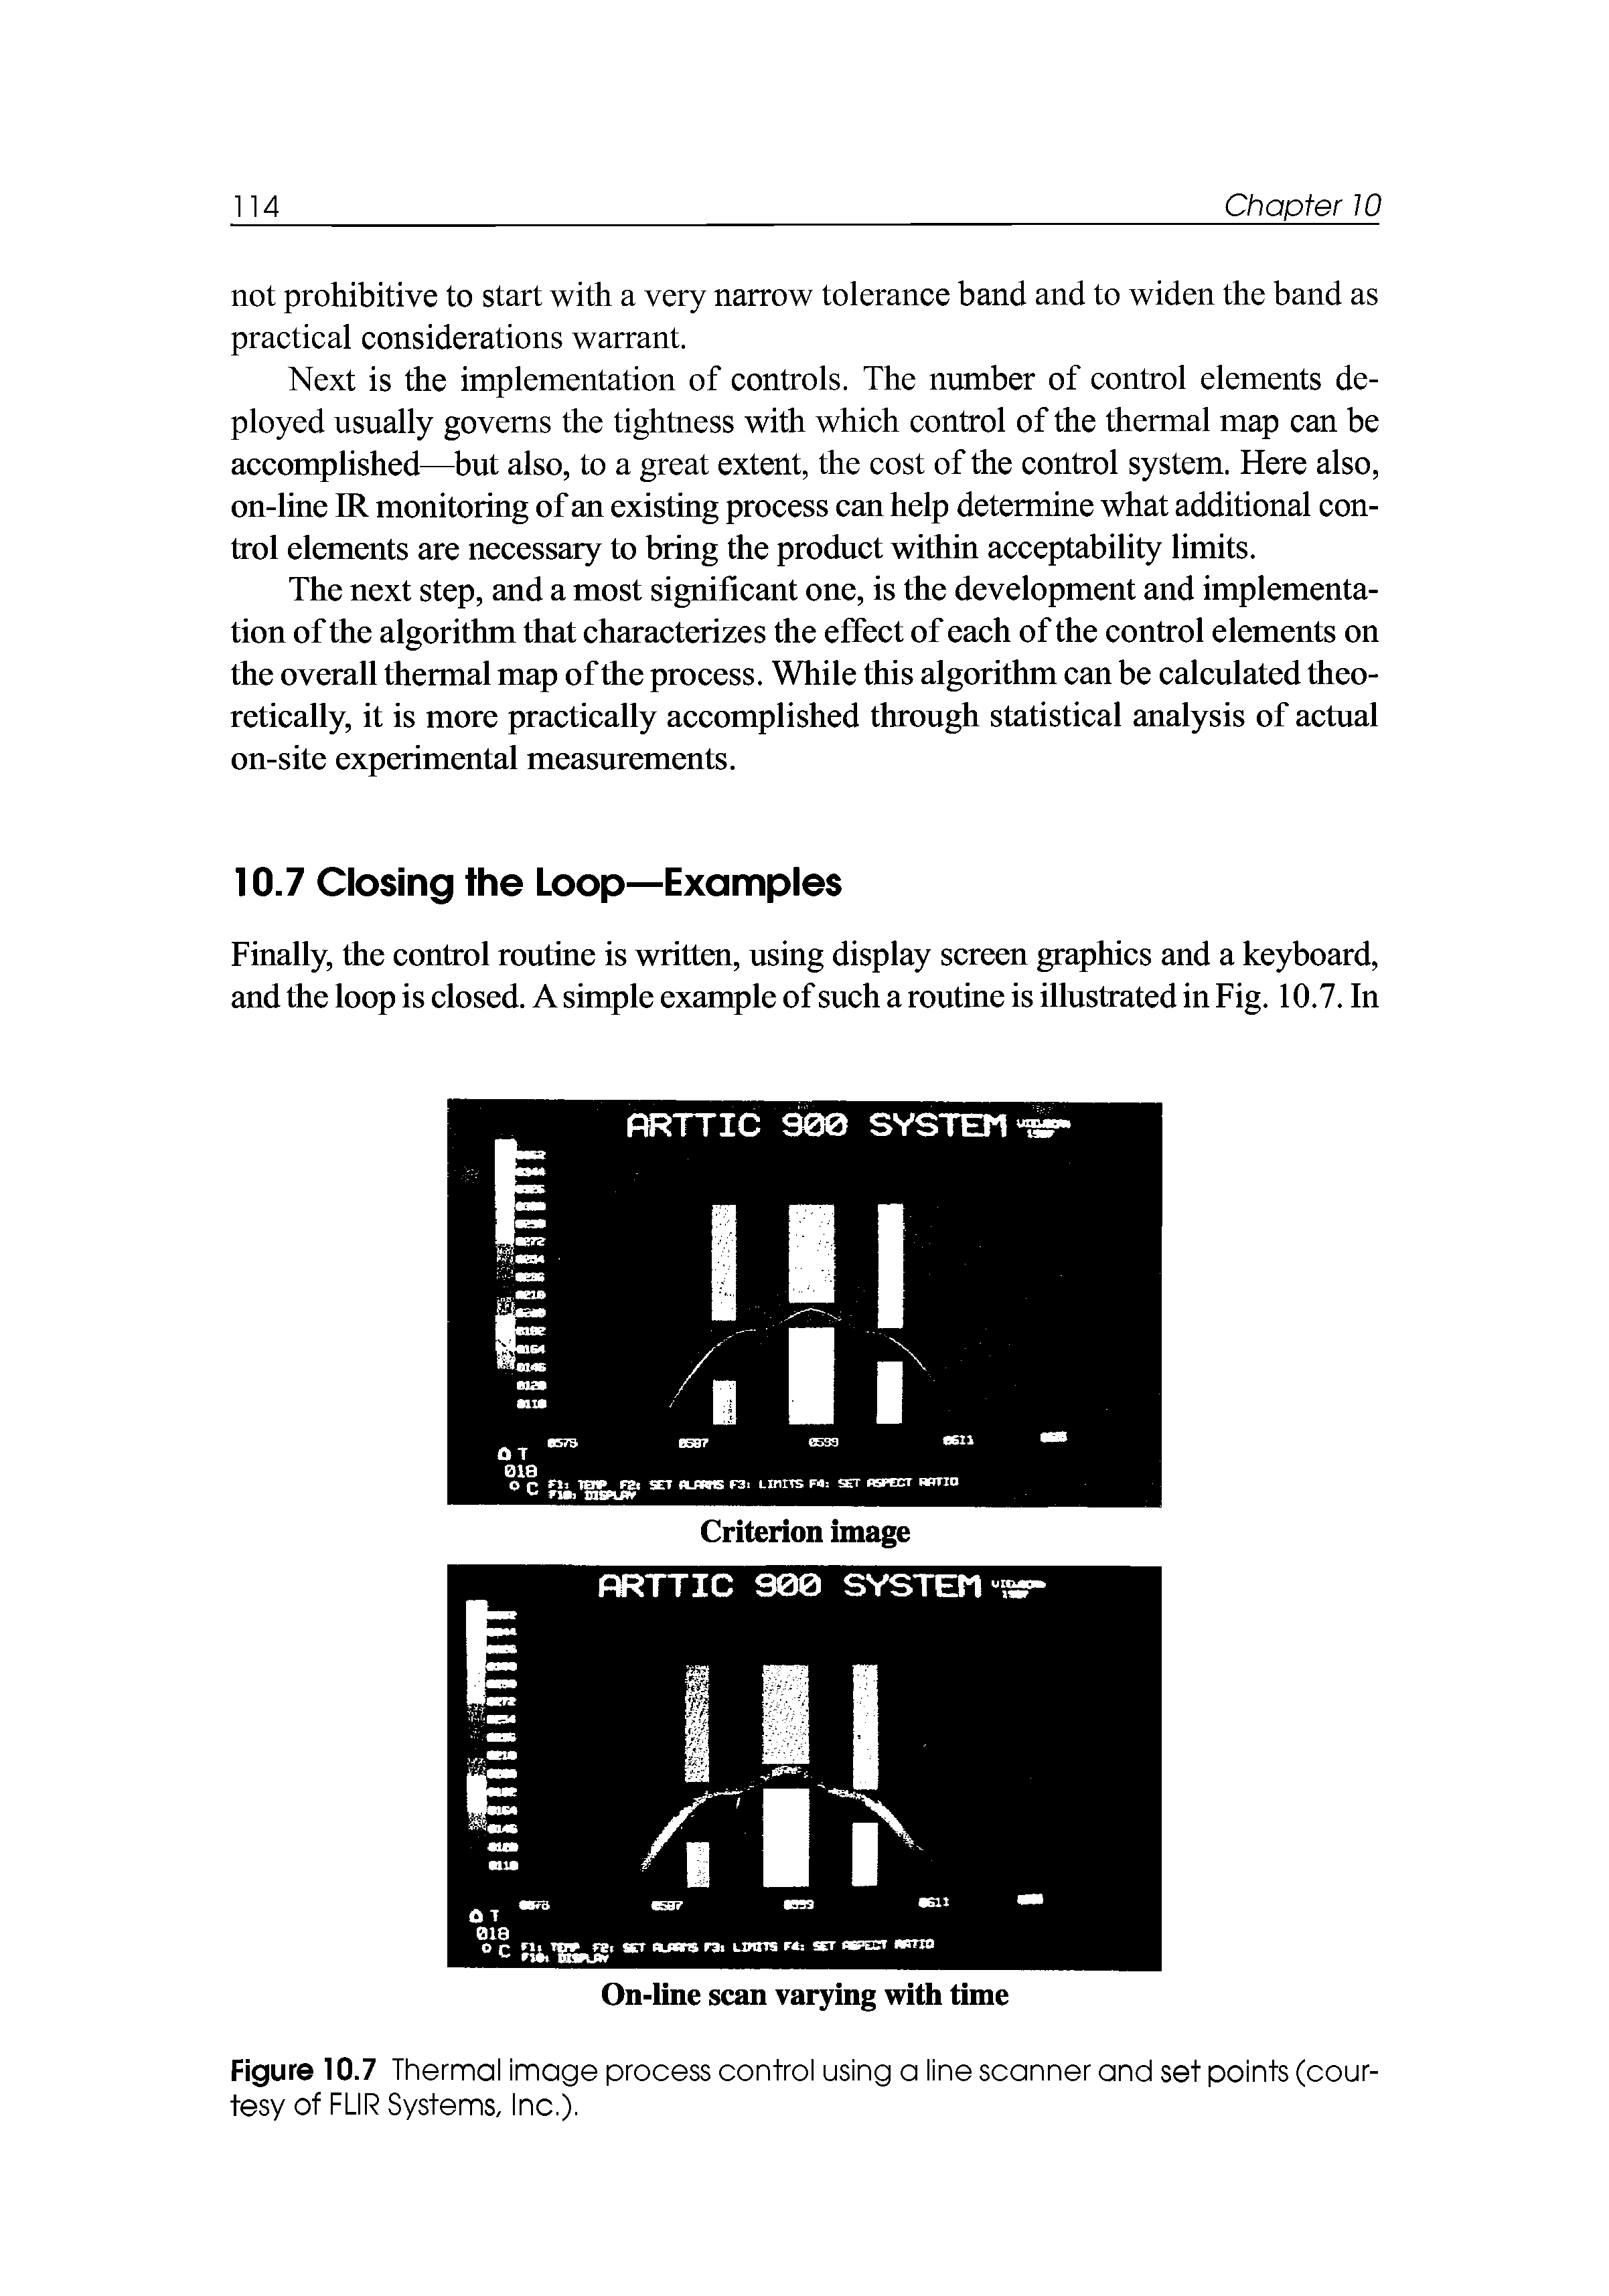 Figure 10.7 Thermal image process control using a line scanner and set points (courtesy of FUR Systems, Inc.).